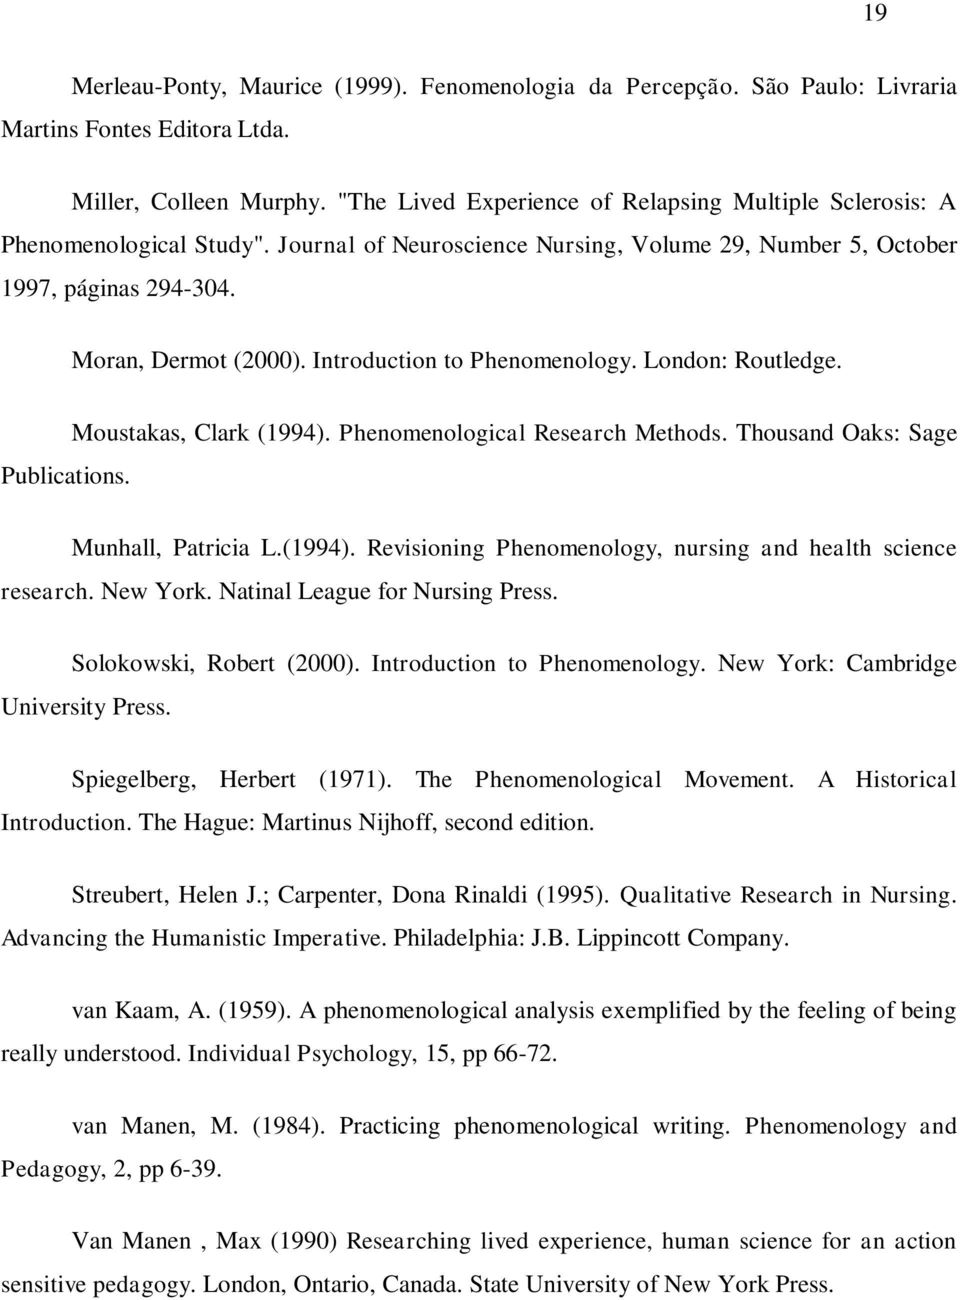 Introduction to Phenomenology. London: Routledge. Publications. Moustakas, Clark (1994). Phenomenological Research Methods. Thousand Oaks: Sage Munhall, Patricia L.(1994). Revisioning Phenomenology, nursing and health science research.